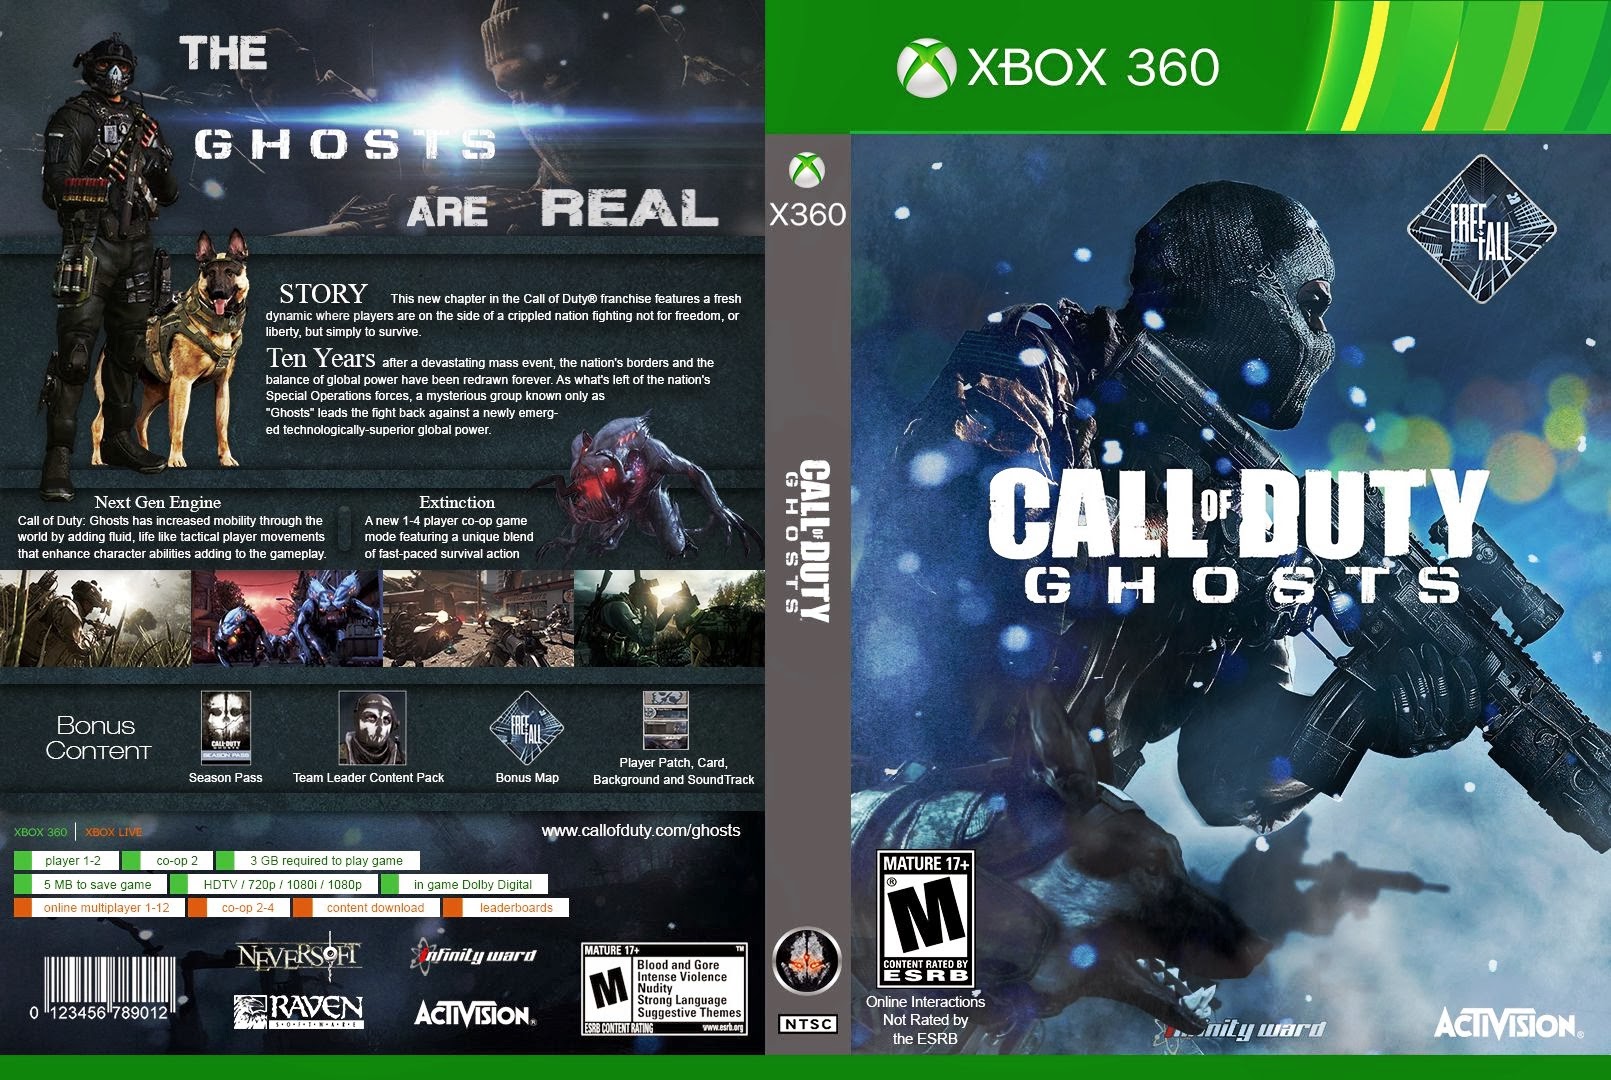 Call of duty xbox game. Call of Duty Ghosts Xbox 360. Call of Duty Xbox 360. Call of Duty Ghosts Xbox 360 обложка. Call of Duty на иксбокс 360.